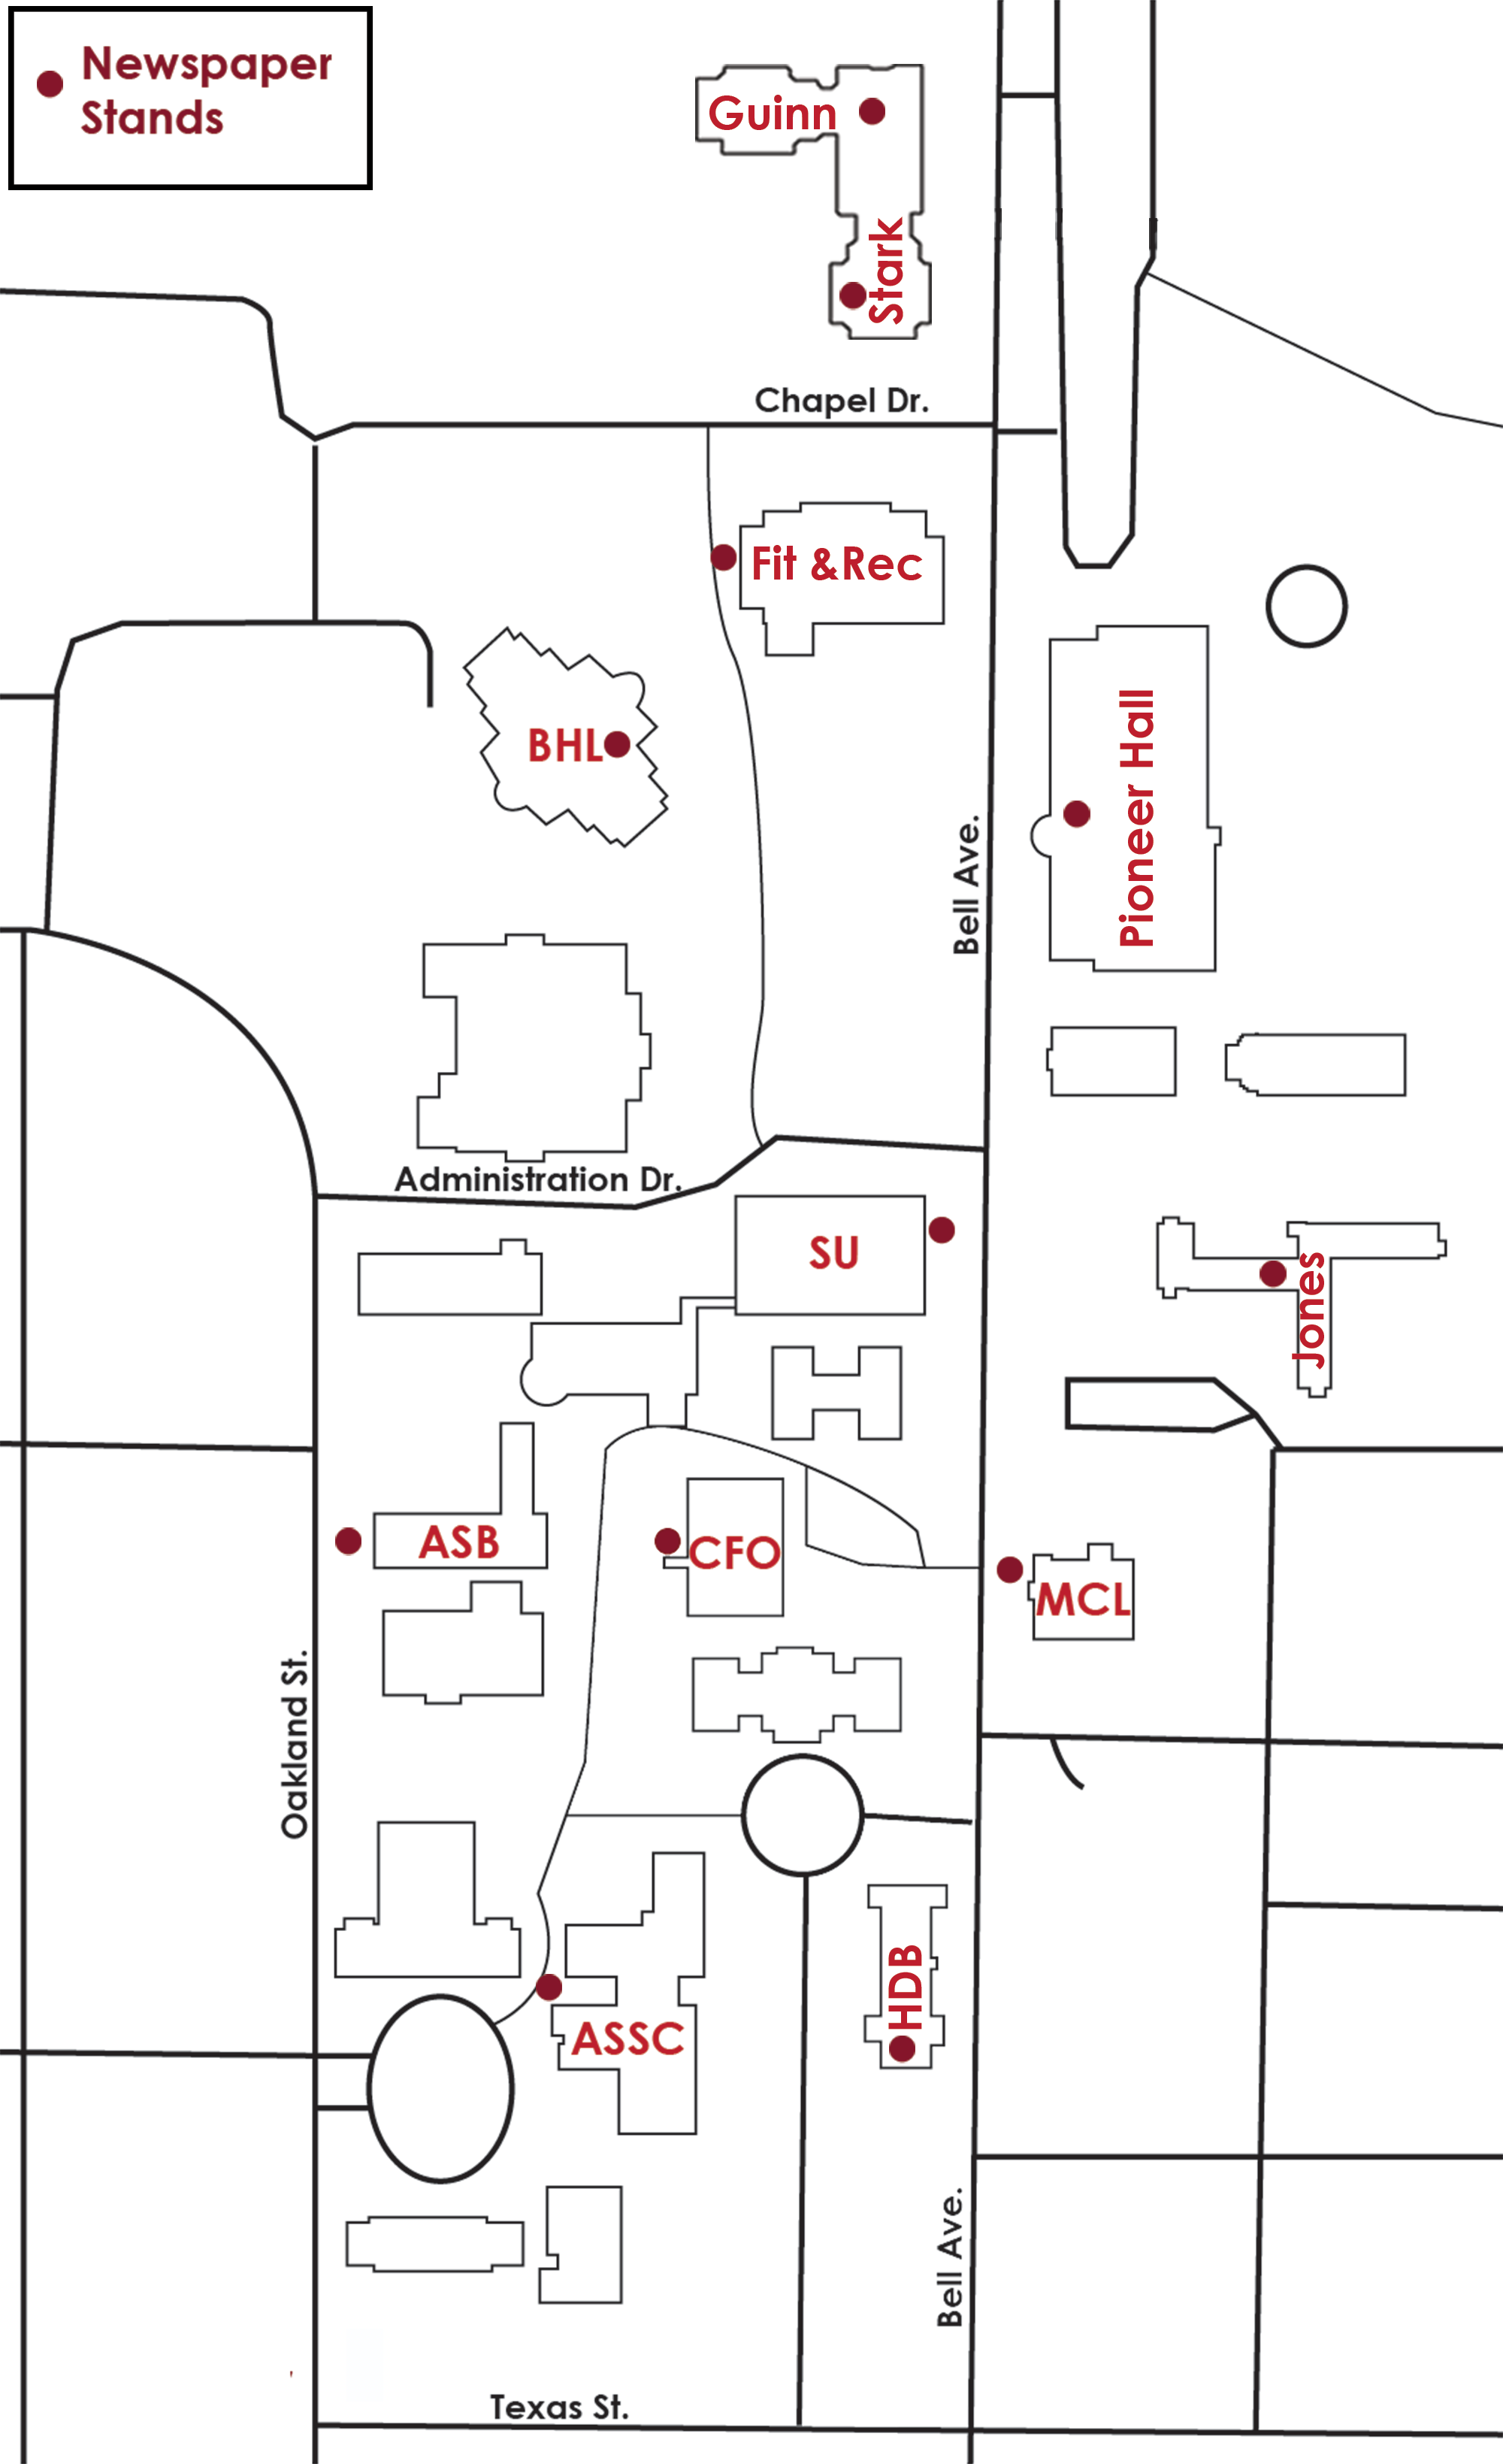 The Lasso Locations on Campus Map